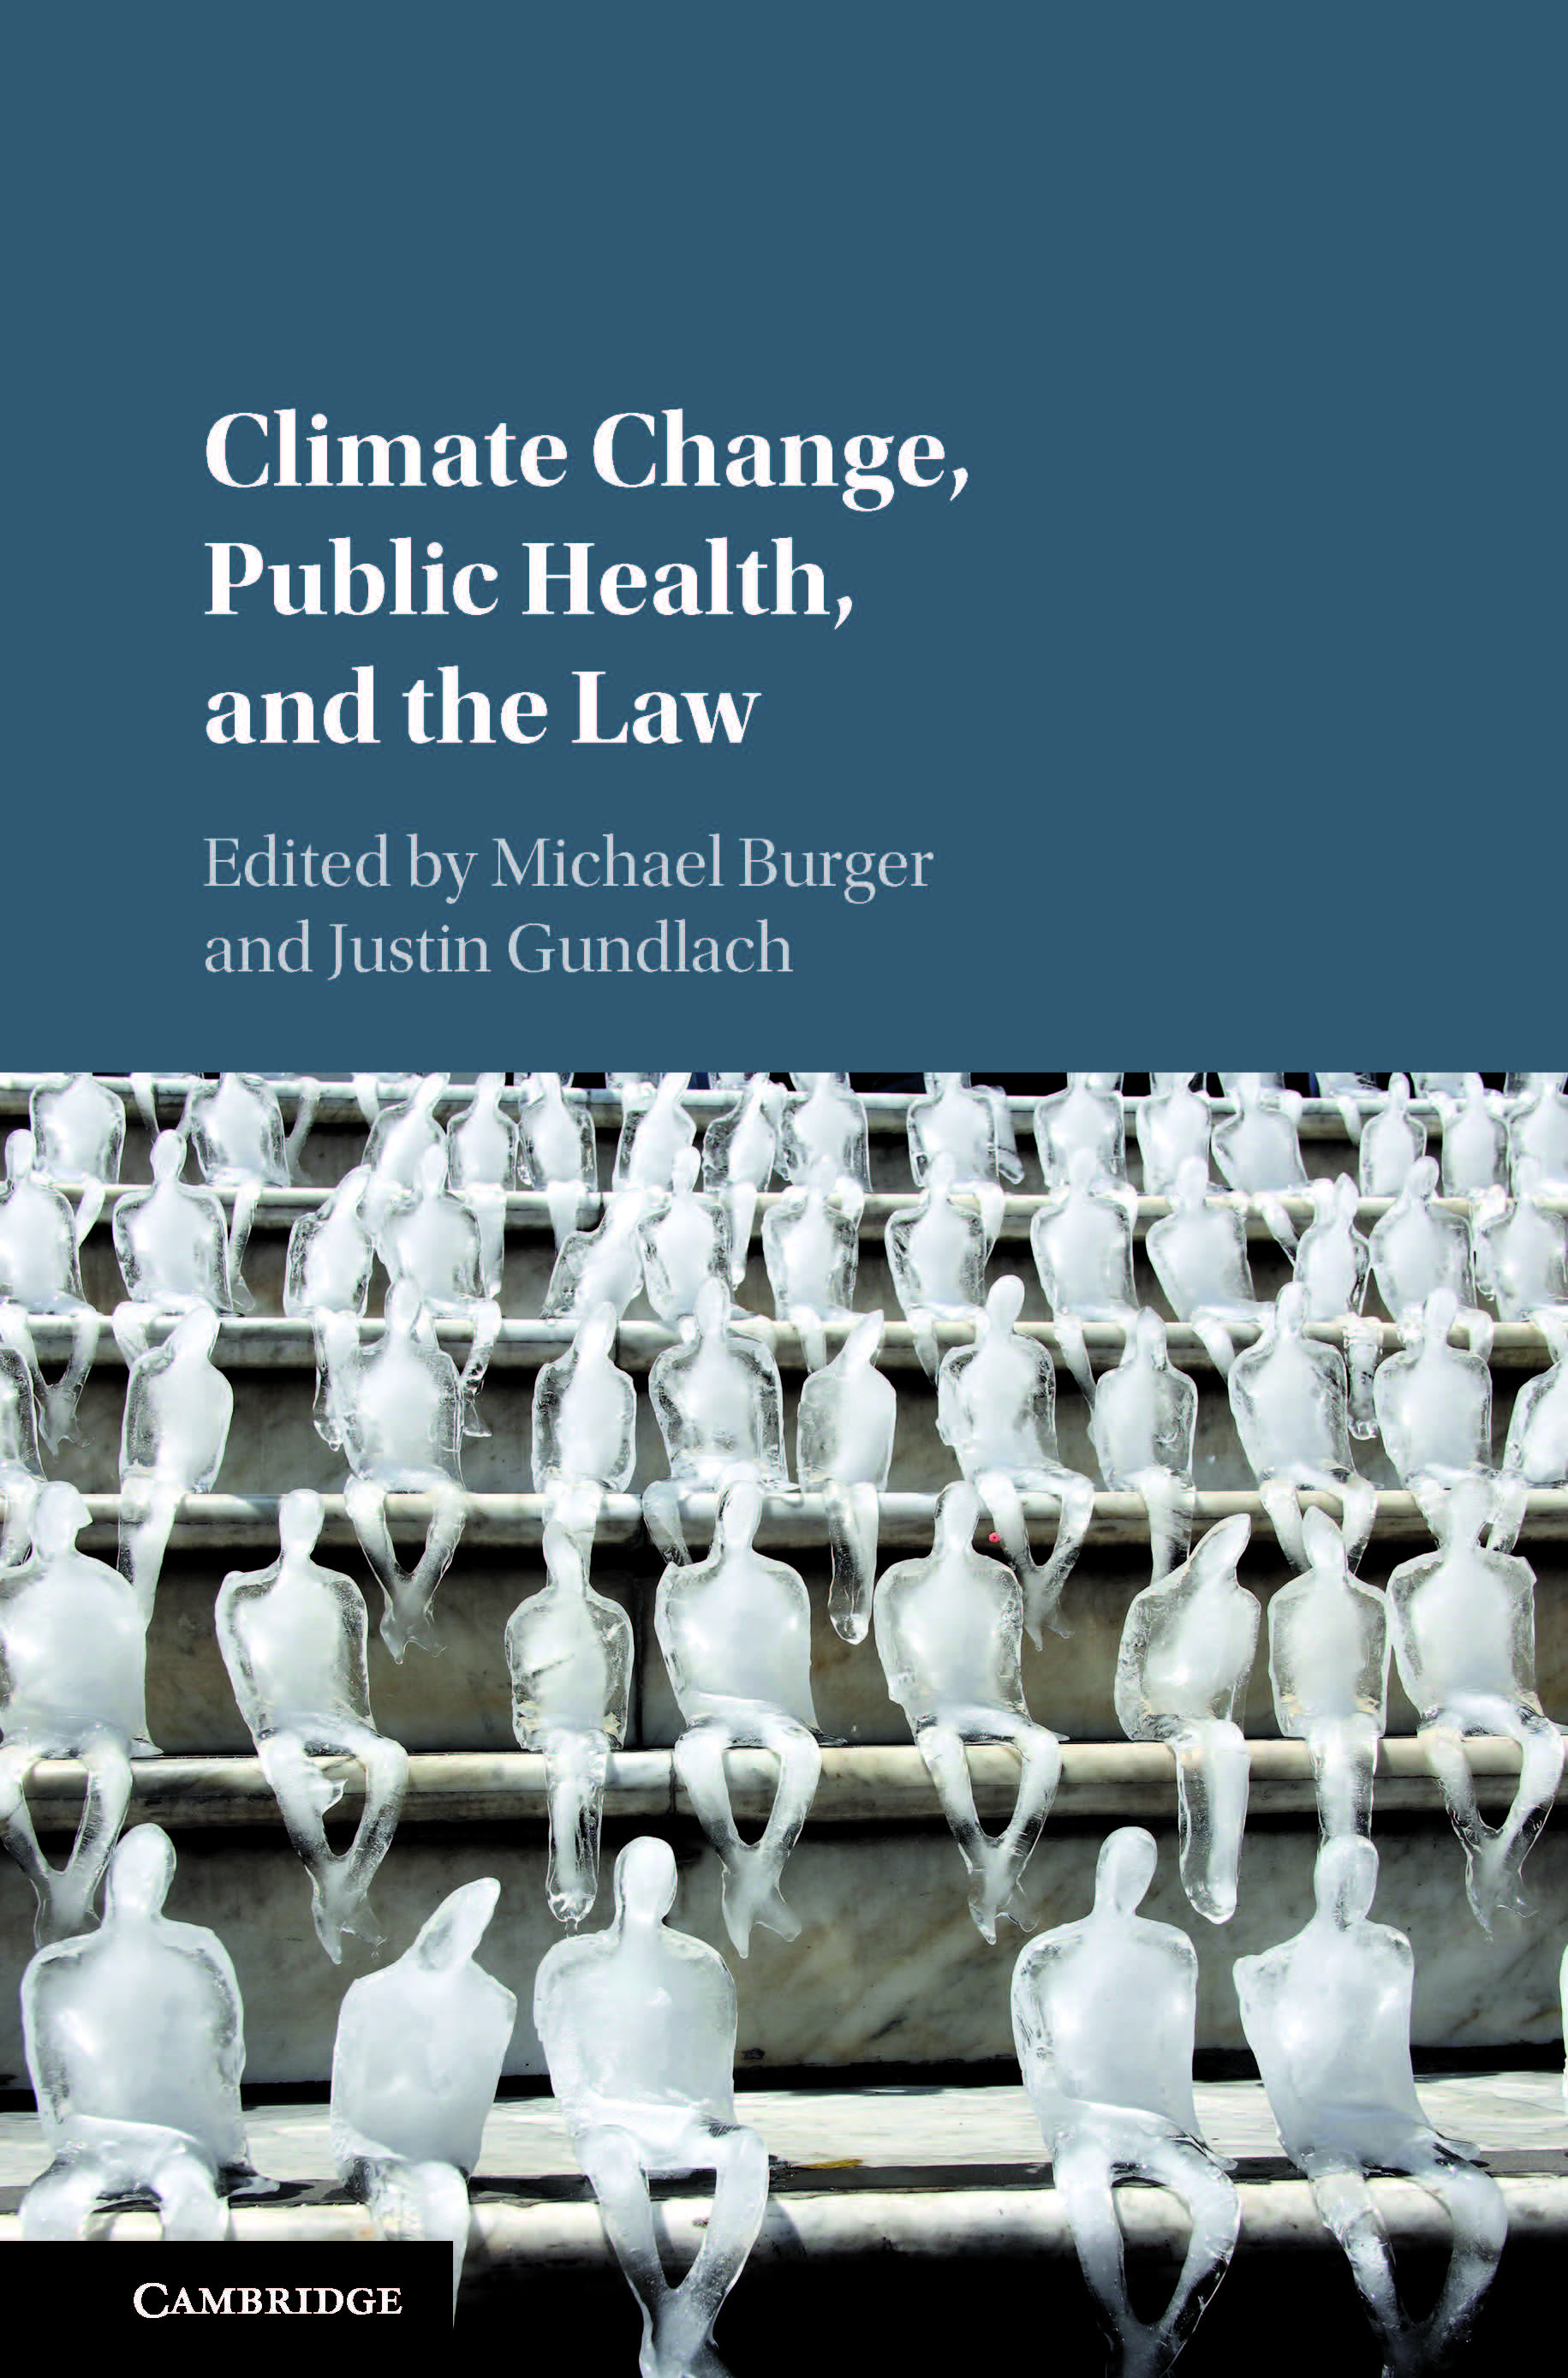 Climate change, public health and the law